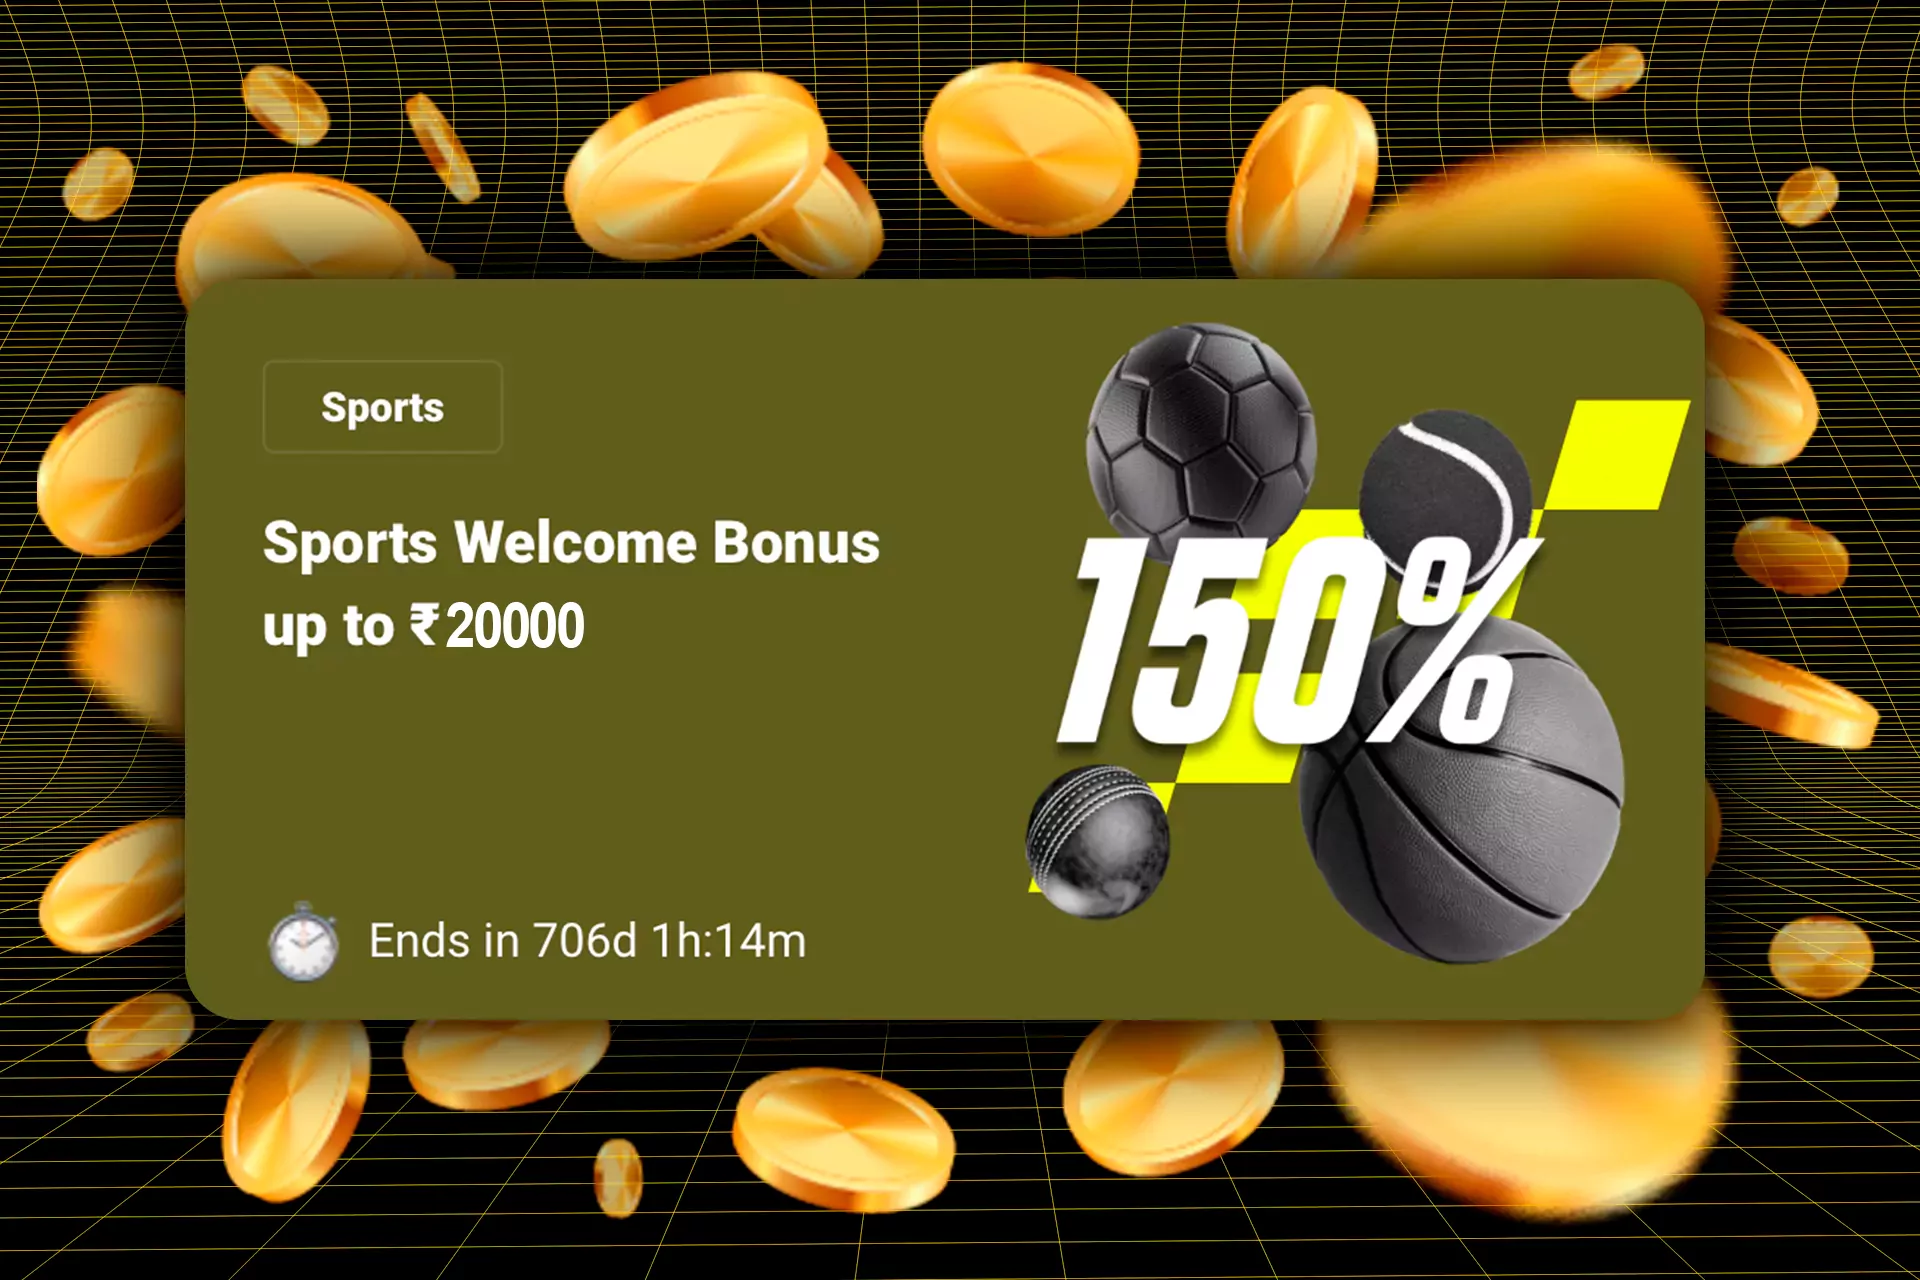 If you are a new user at Parimatch, don't miss the chance of getting up to 20000 INR from the bookmaker as a welcome bonus.